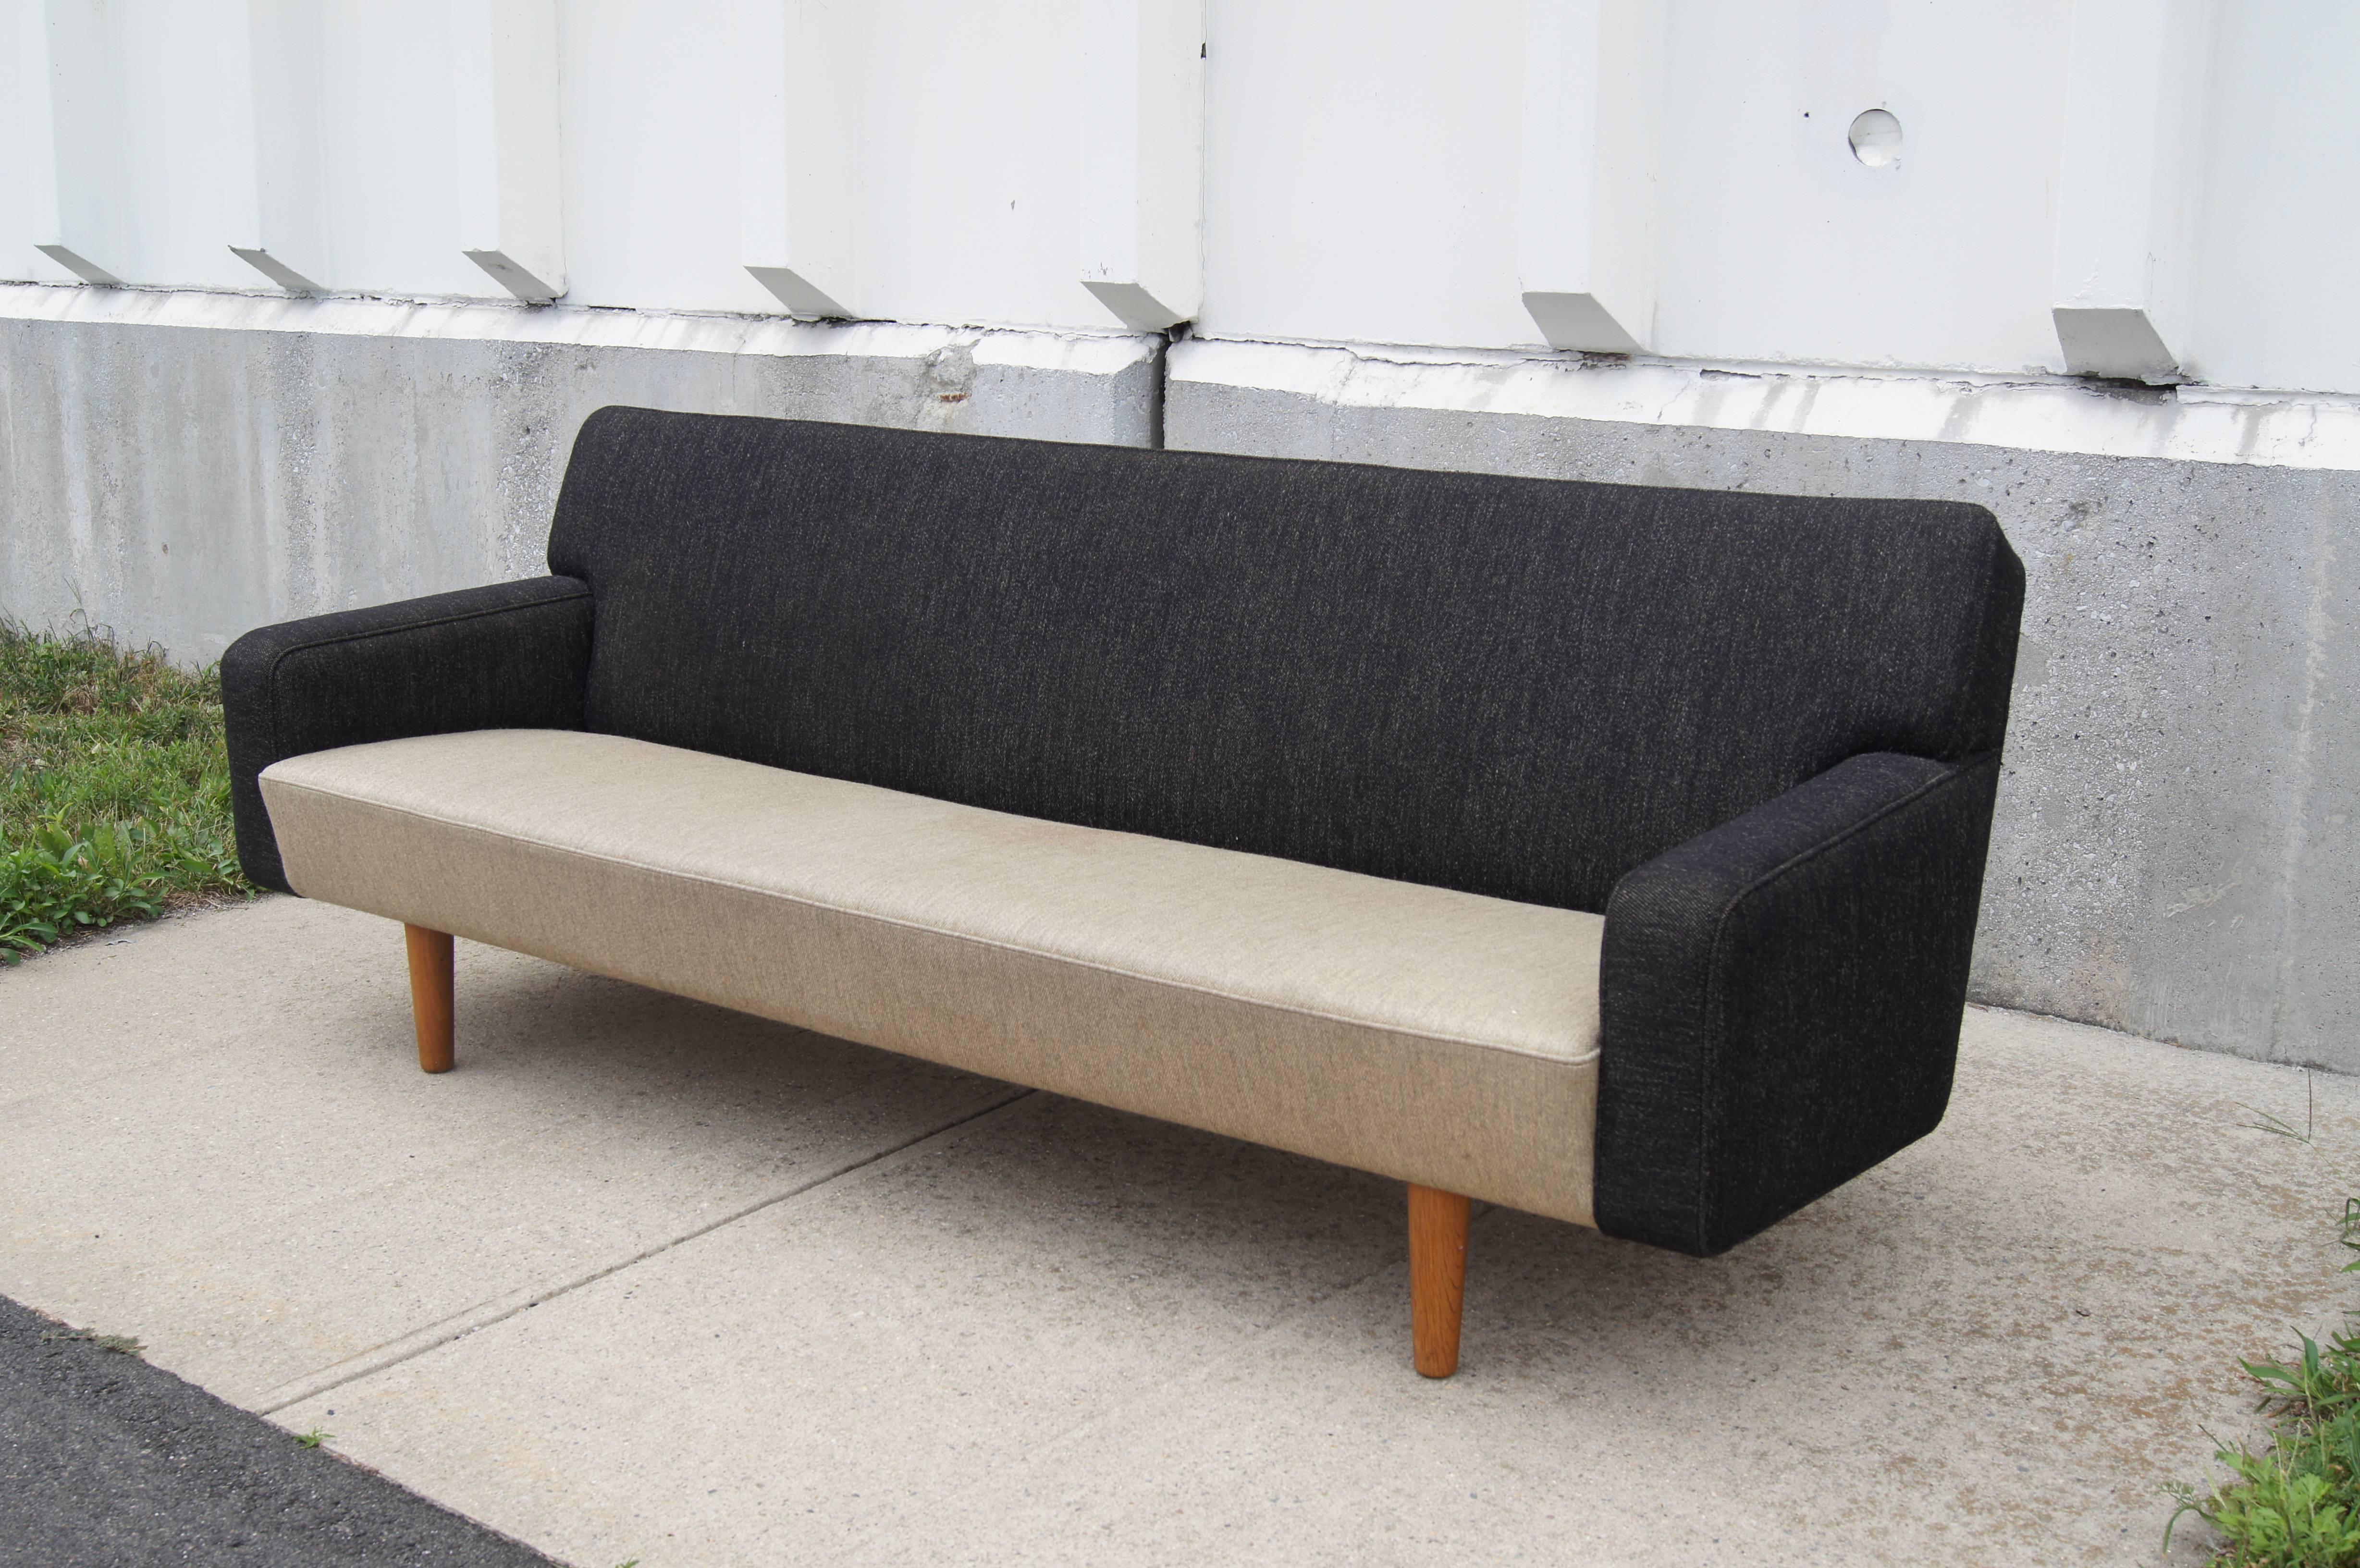 The strong, clean lines of the AP33 sofa, designed by Hans Wegner for A.P. Stolen in the mid-1950s, make it a perfect fit for a contemporary environment. Set on oak legs and upholstered in contrasting textiles, this sofa looks attractive from all